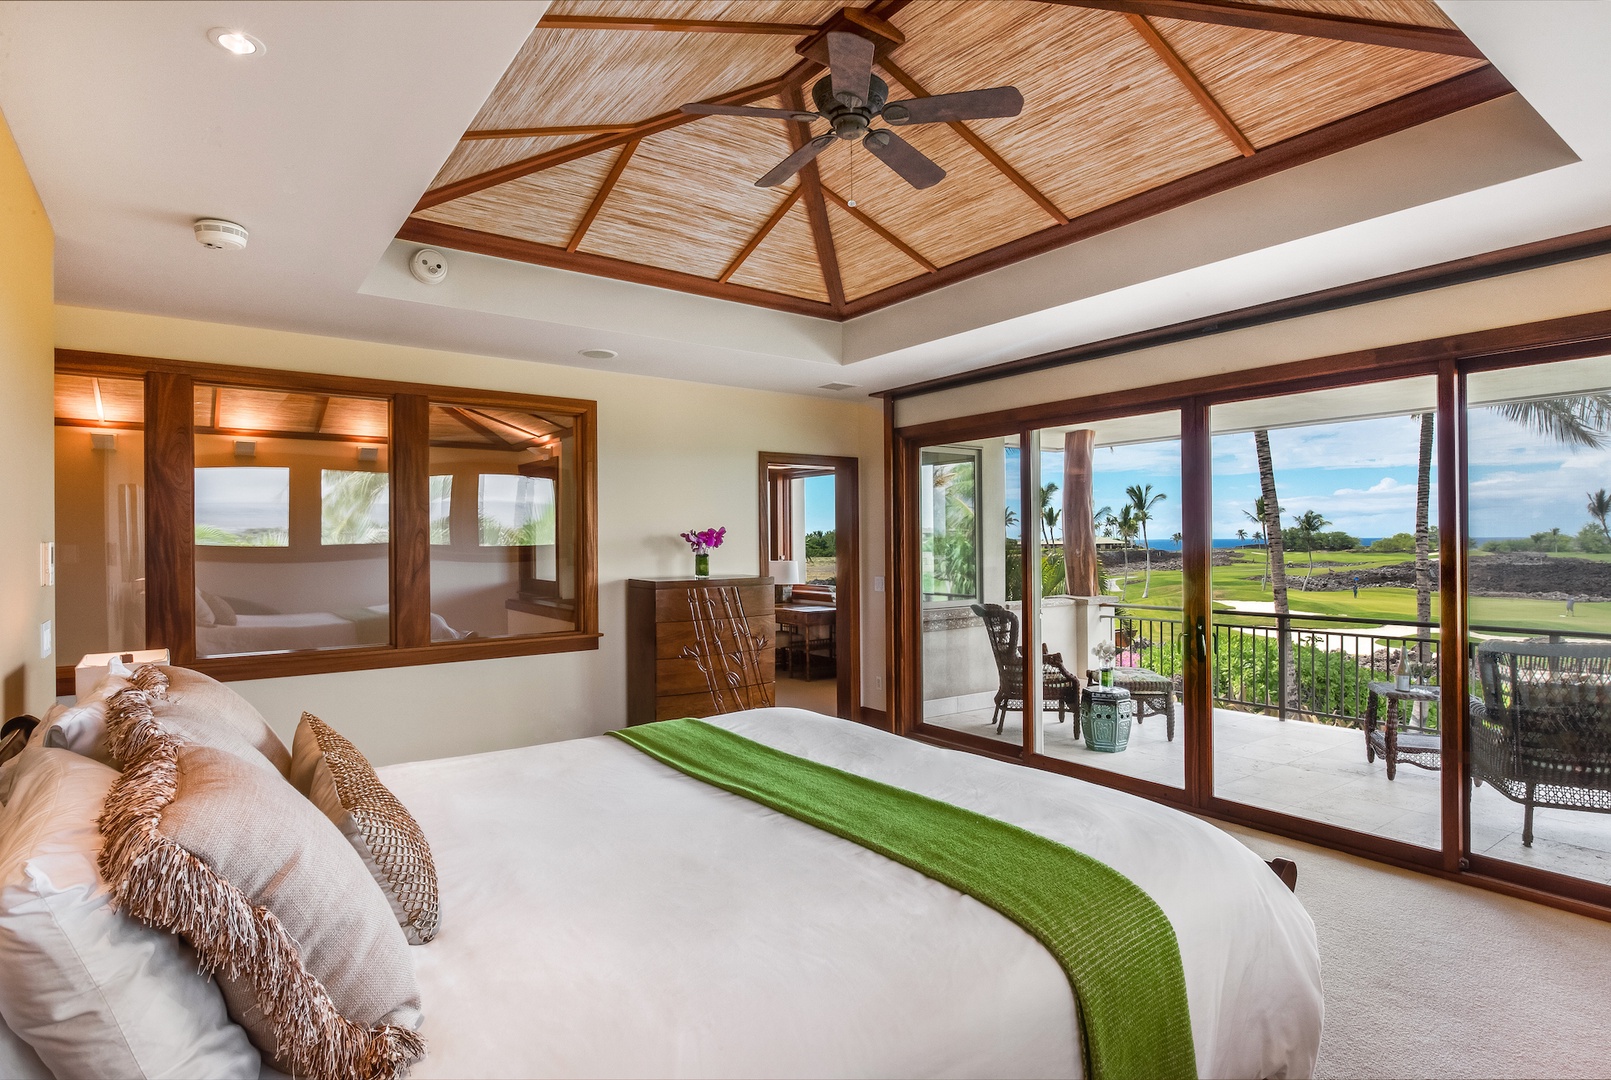 Kamuela Vacation Rentals, 3BD Ke Kailani (1C) at Mauna Lani Resort - Upstairs Primary Commands the Entire Second Floor w/ Separate Office Space w/ Twin Daybed, Electronic Pocket Doors Open to Private Lanai Overlooking Pool Garden, Golf Course and Out to Ocean